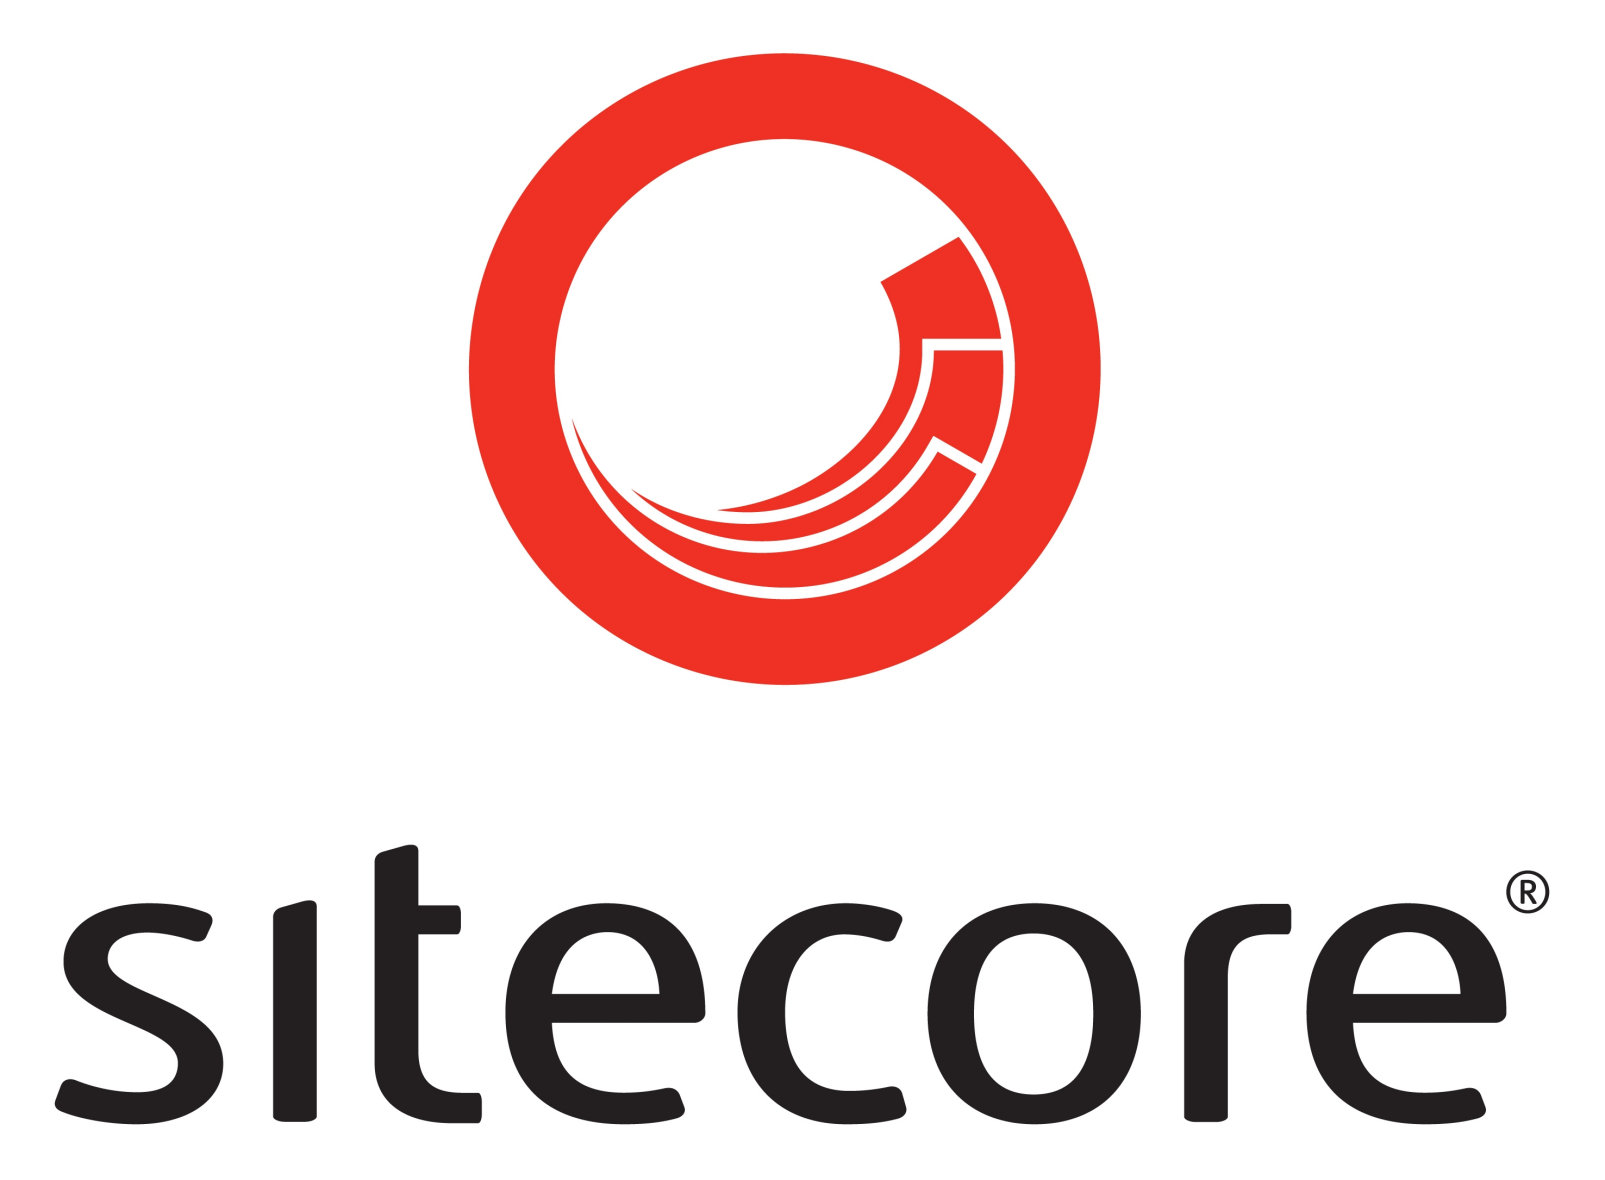 Sitecore - Session expires in one minute and how to mitigate this default behavior